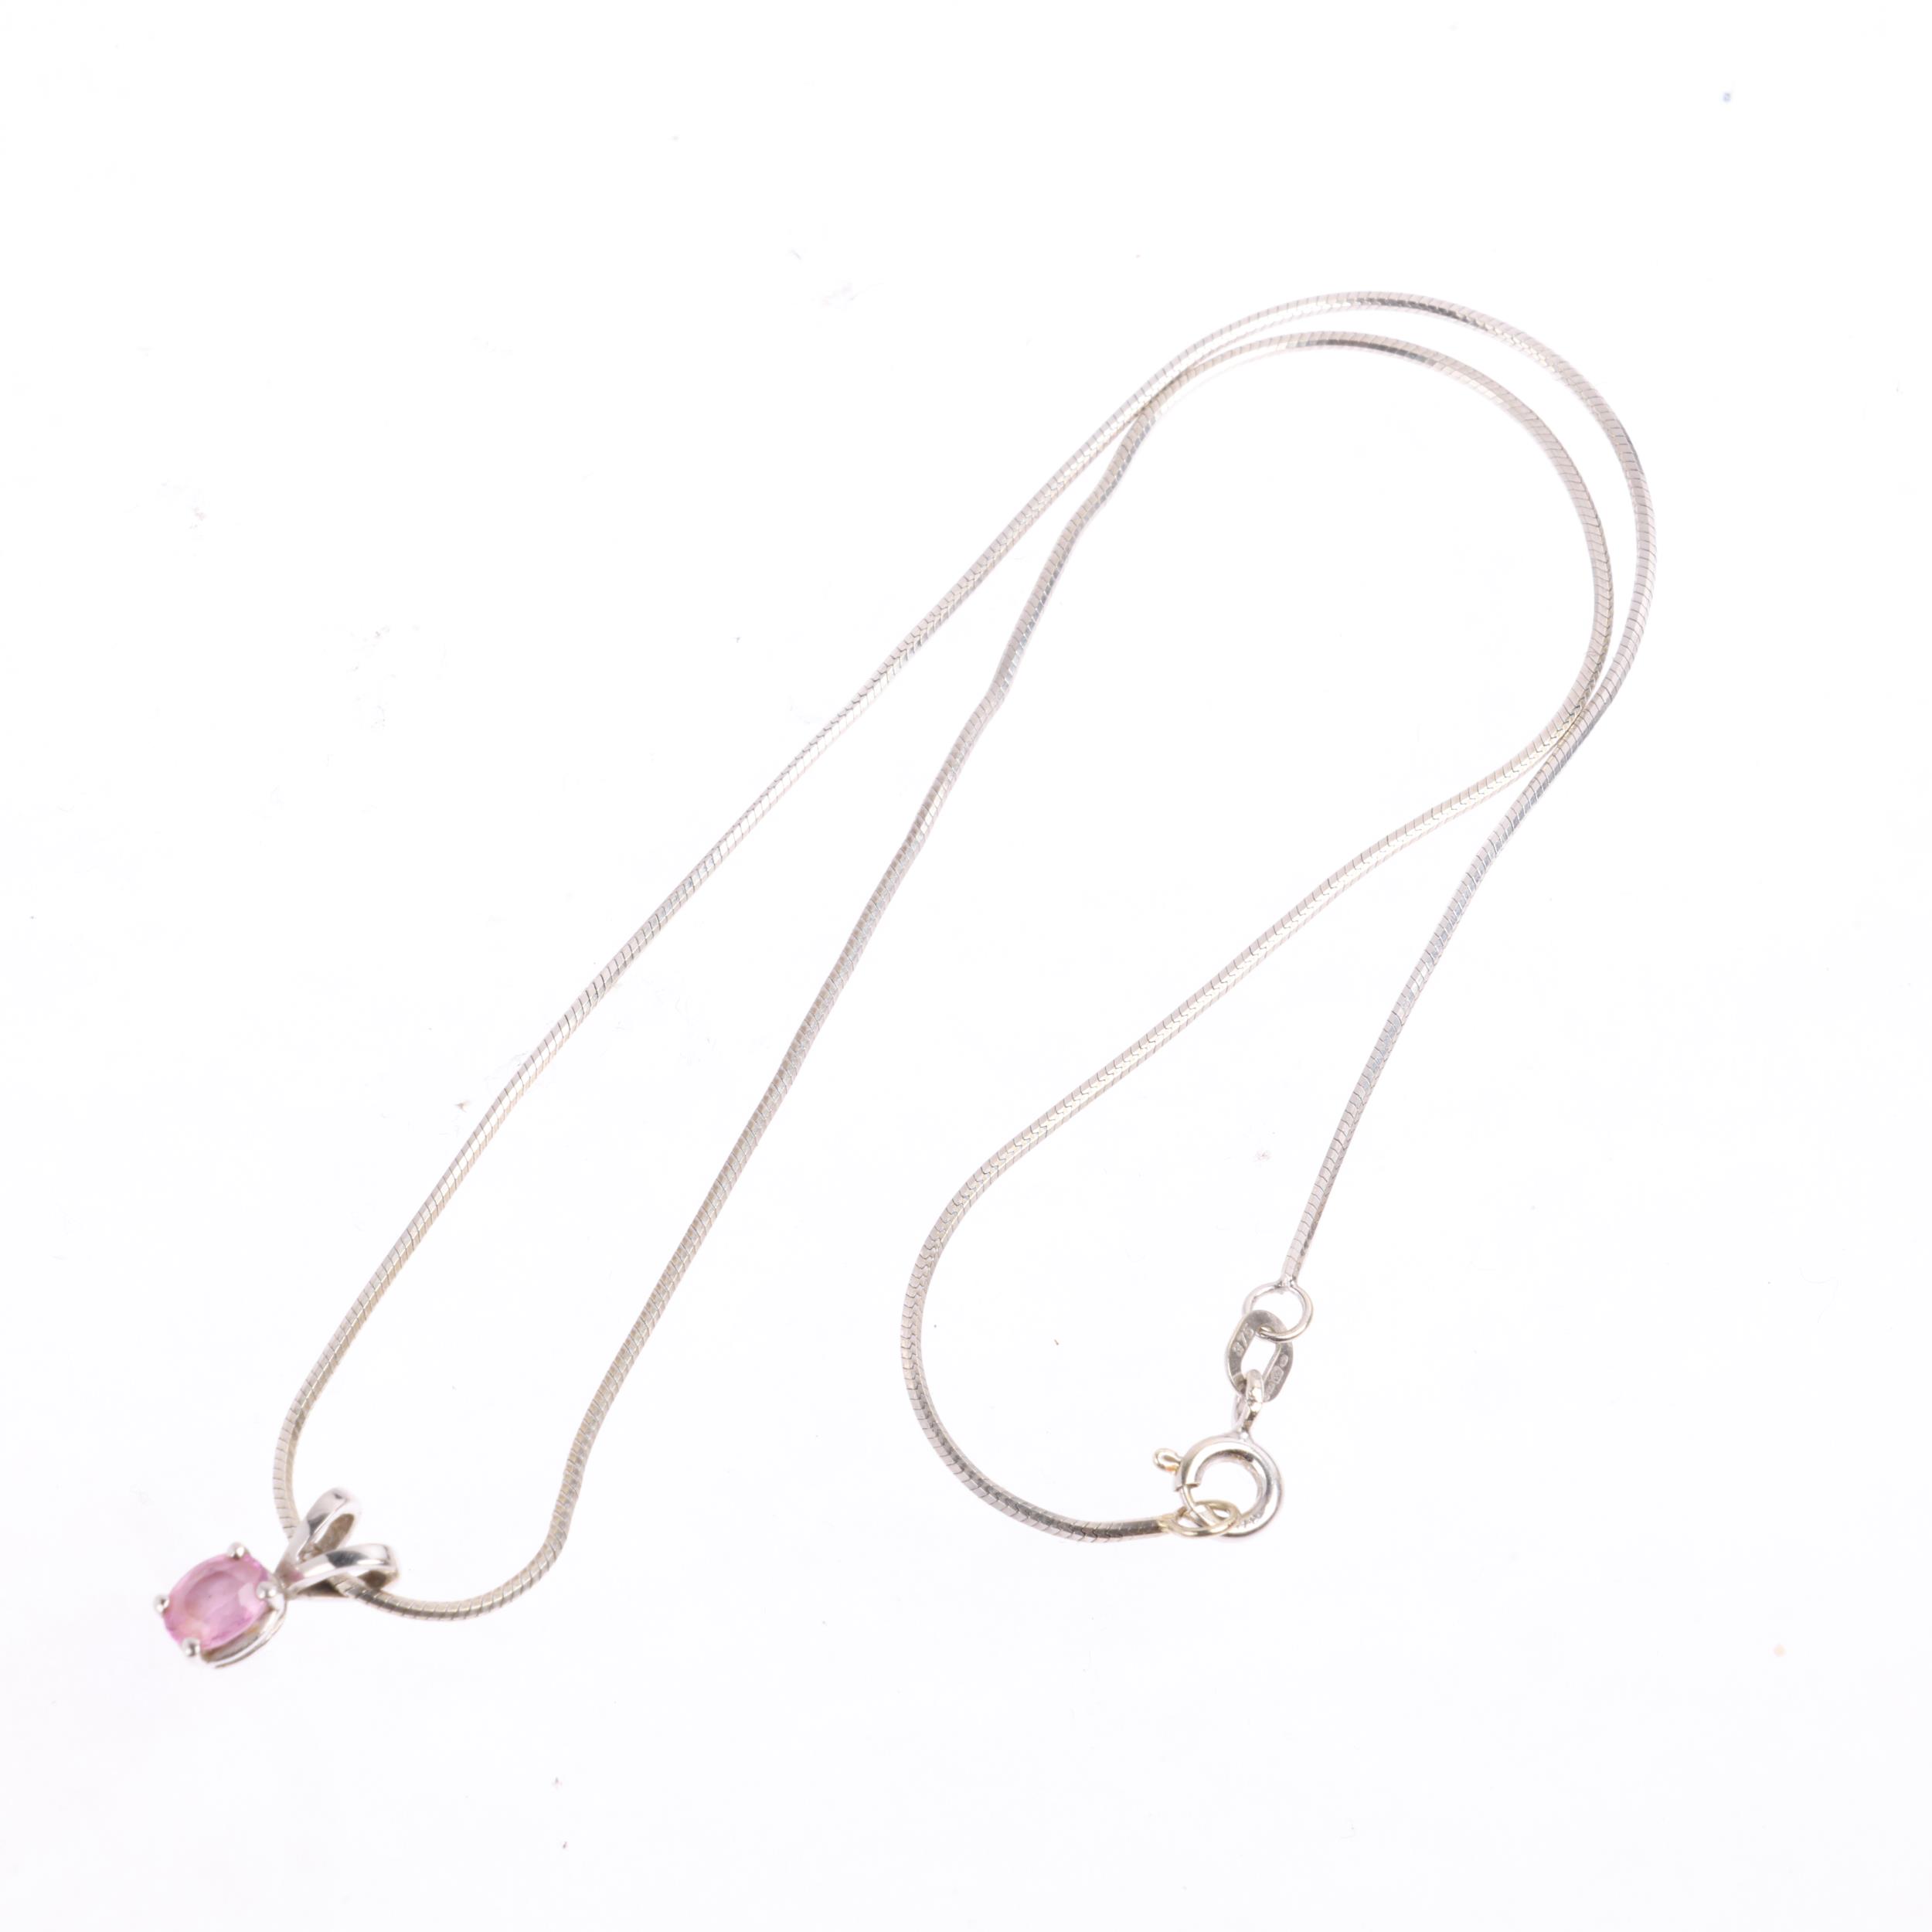 A 9ct white gold pink sapphire pendant necklace, on 9ct herringbone link chain, pendant 10.9mm, - Image 2 of 3